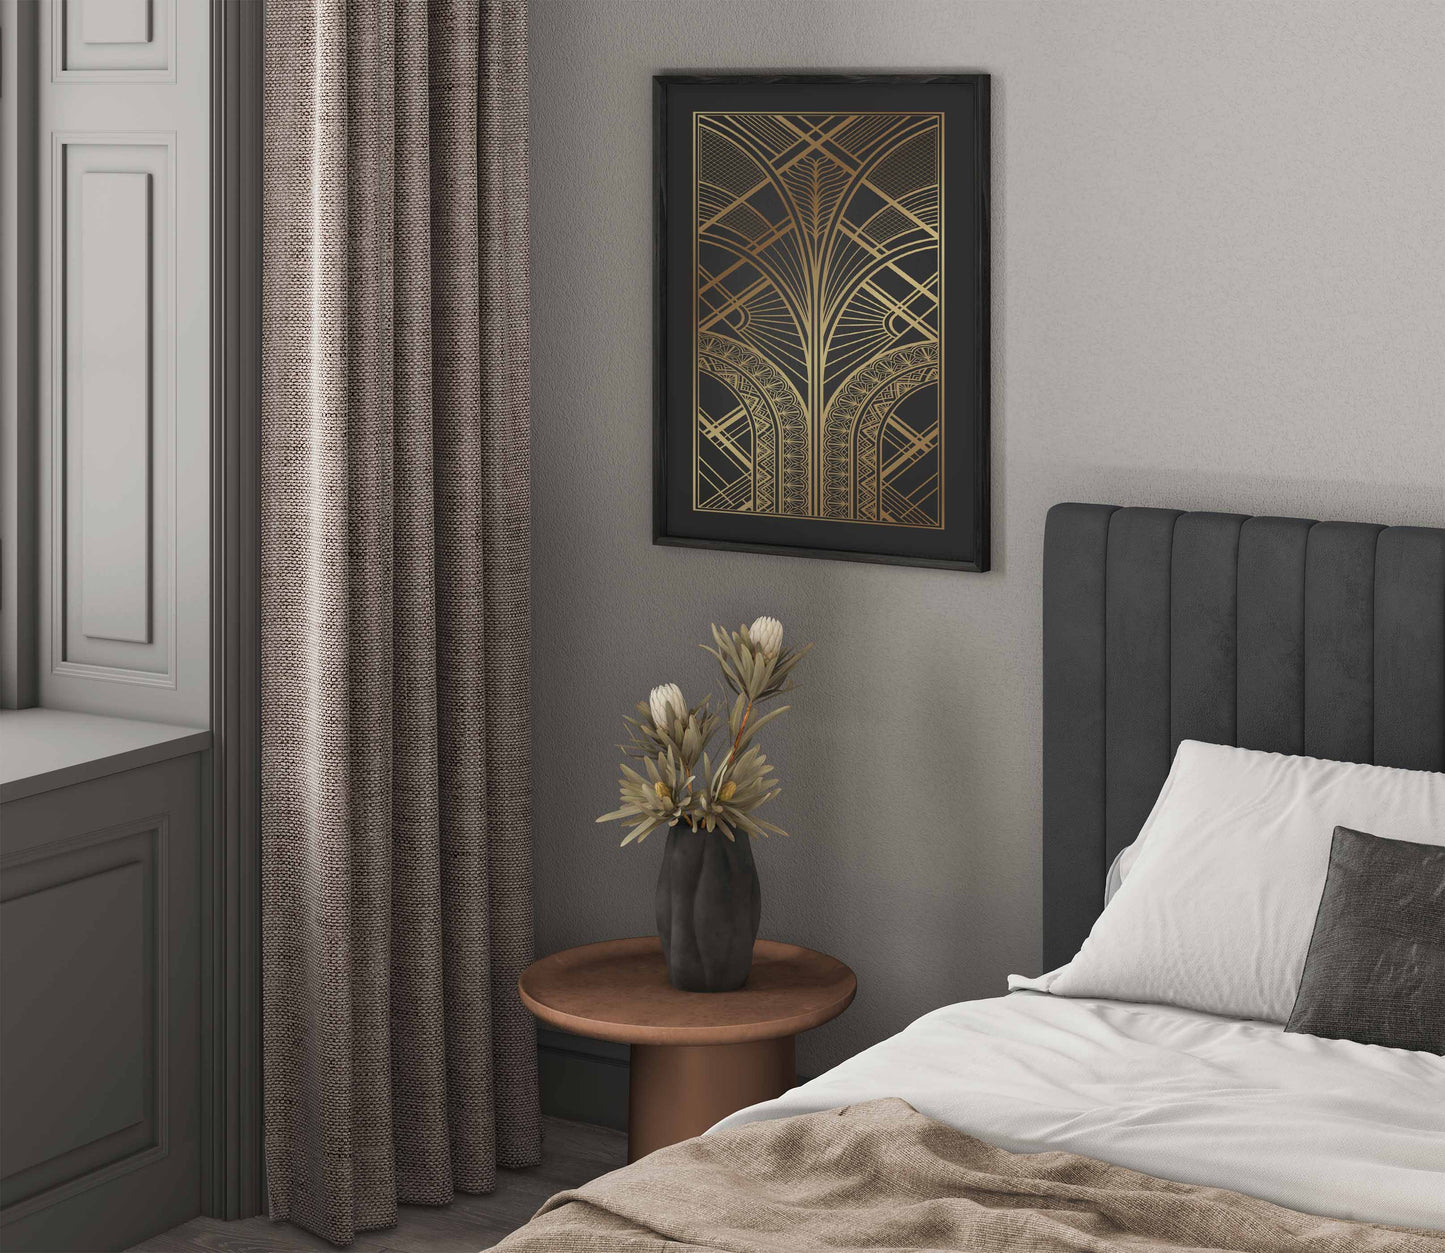 Art deco print in gold and black